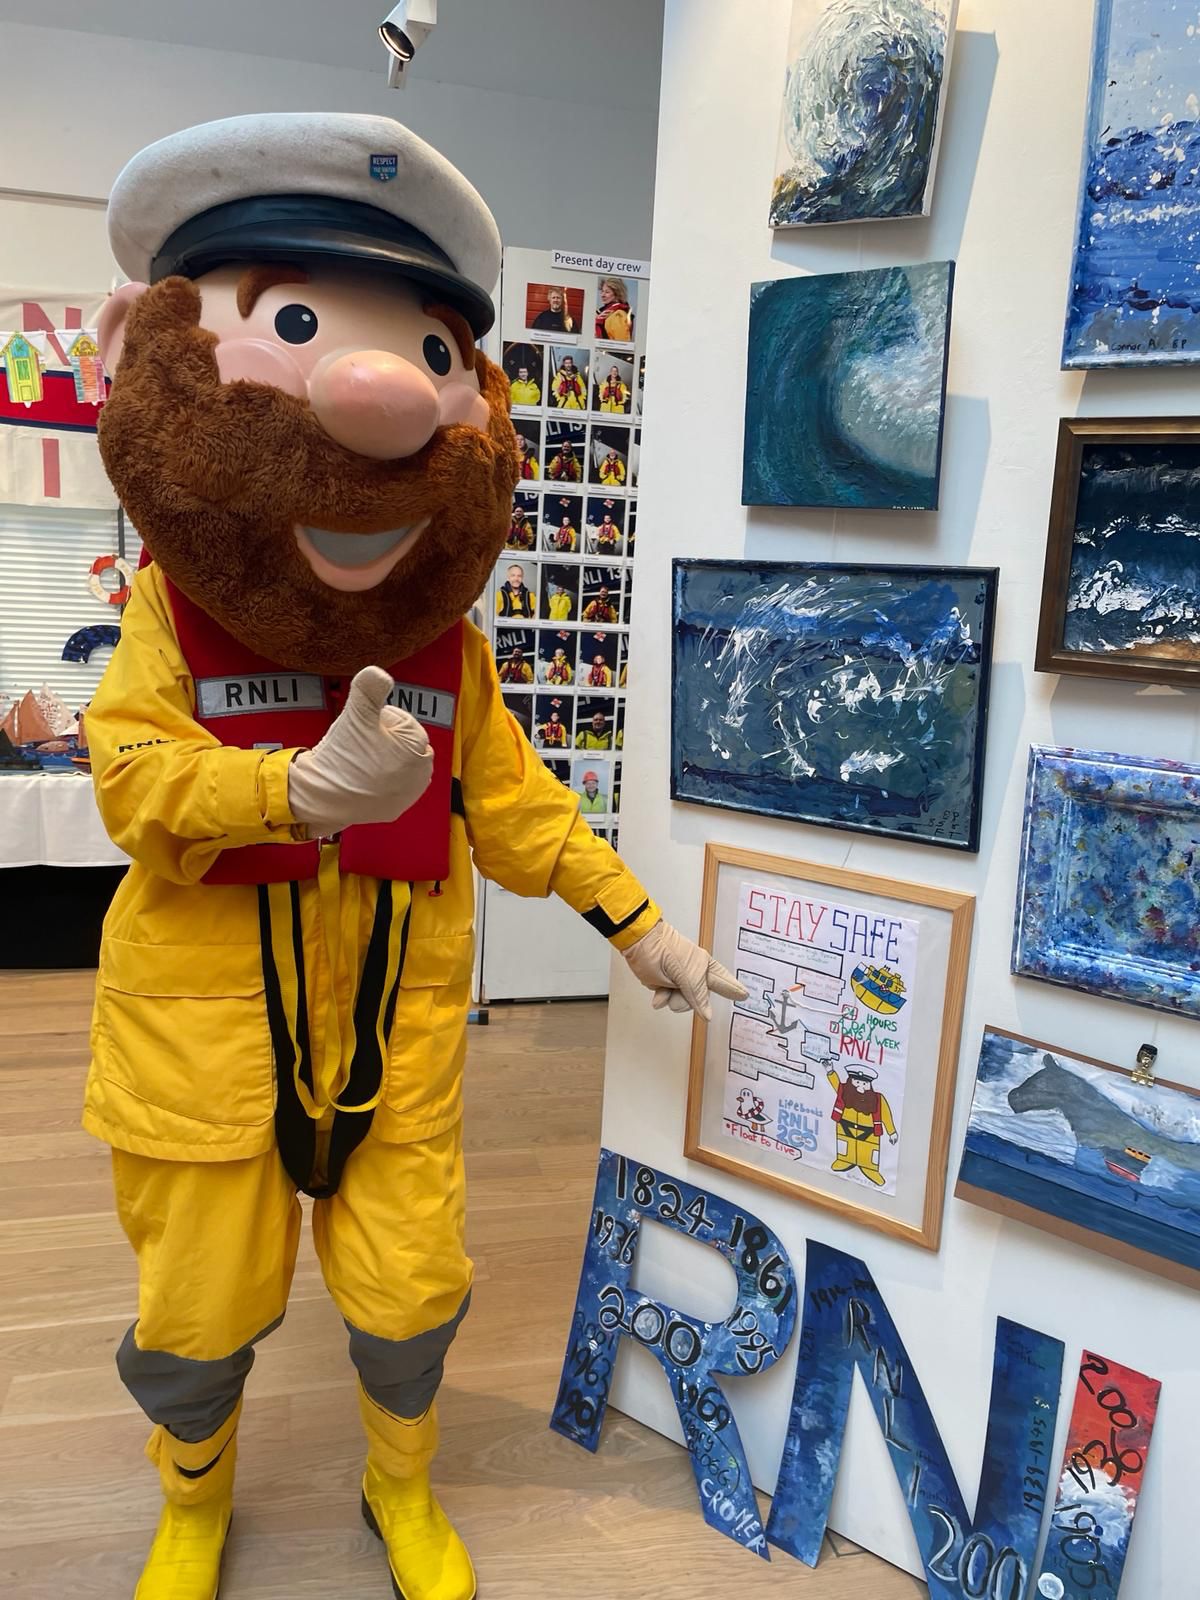 Stormy Stan with some of the children's artwork and good advice